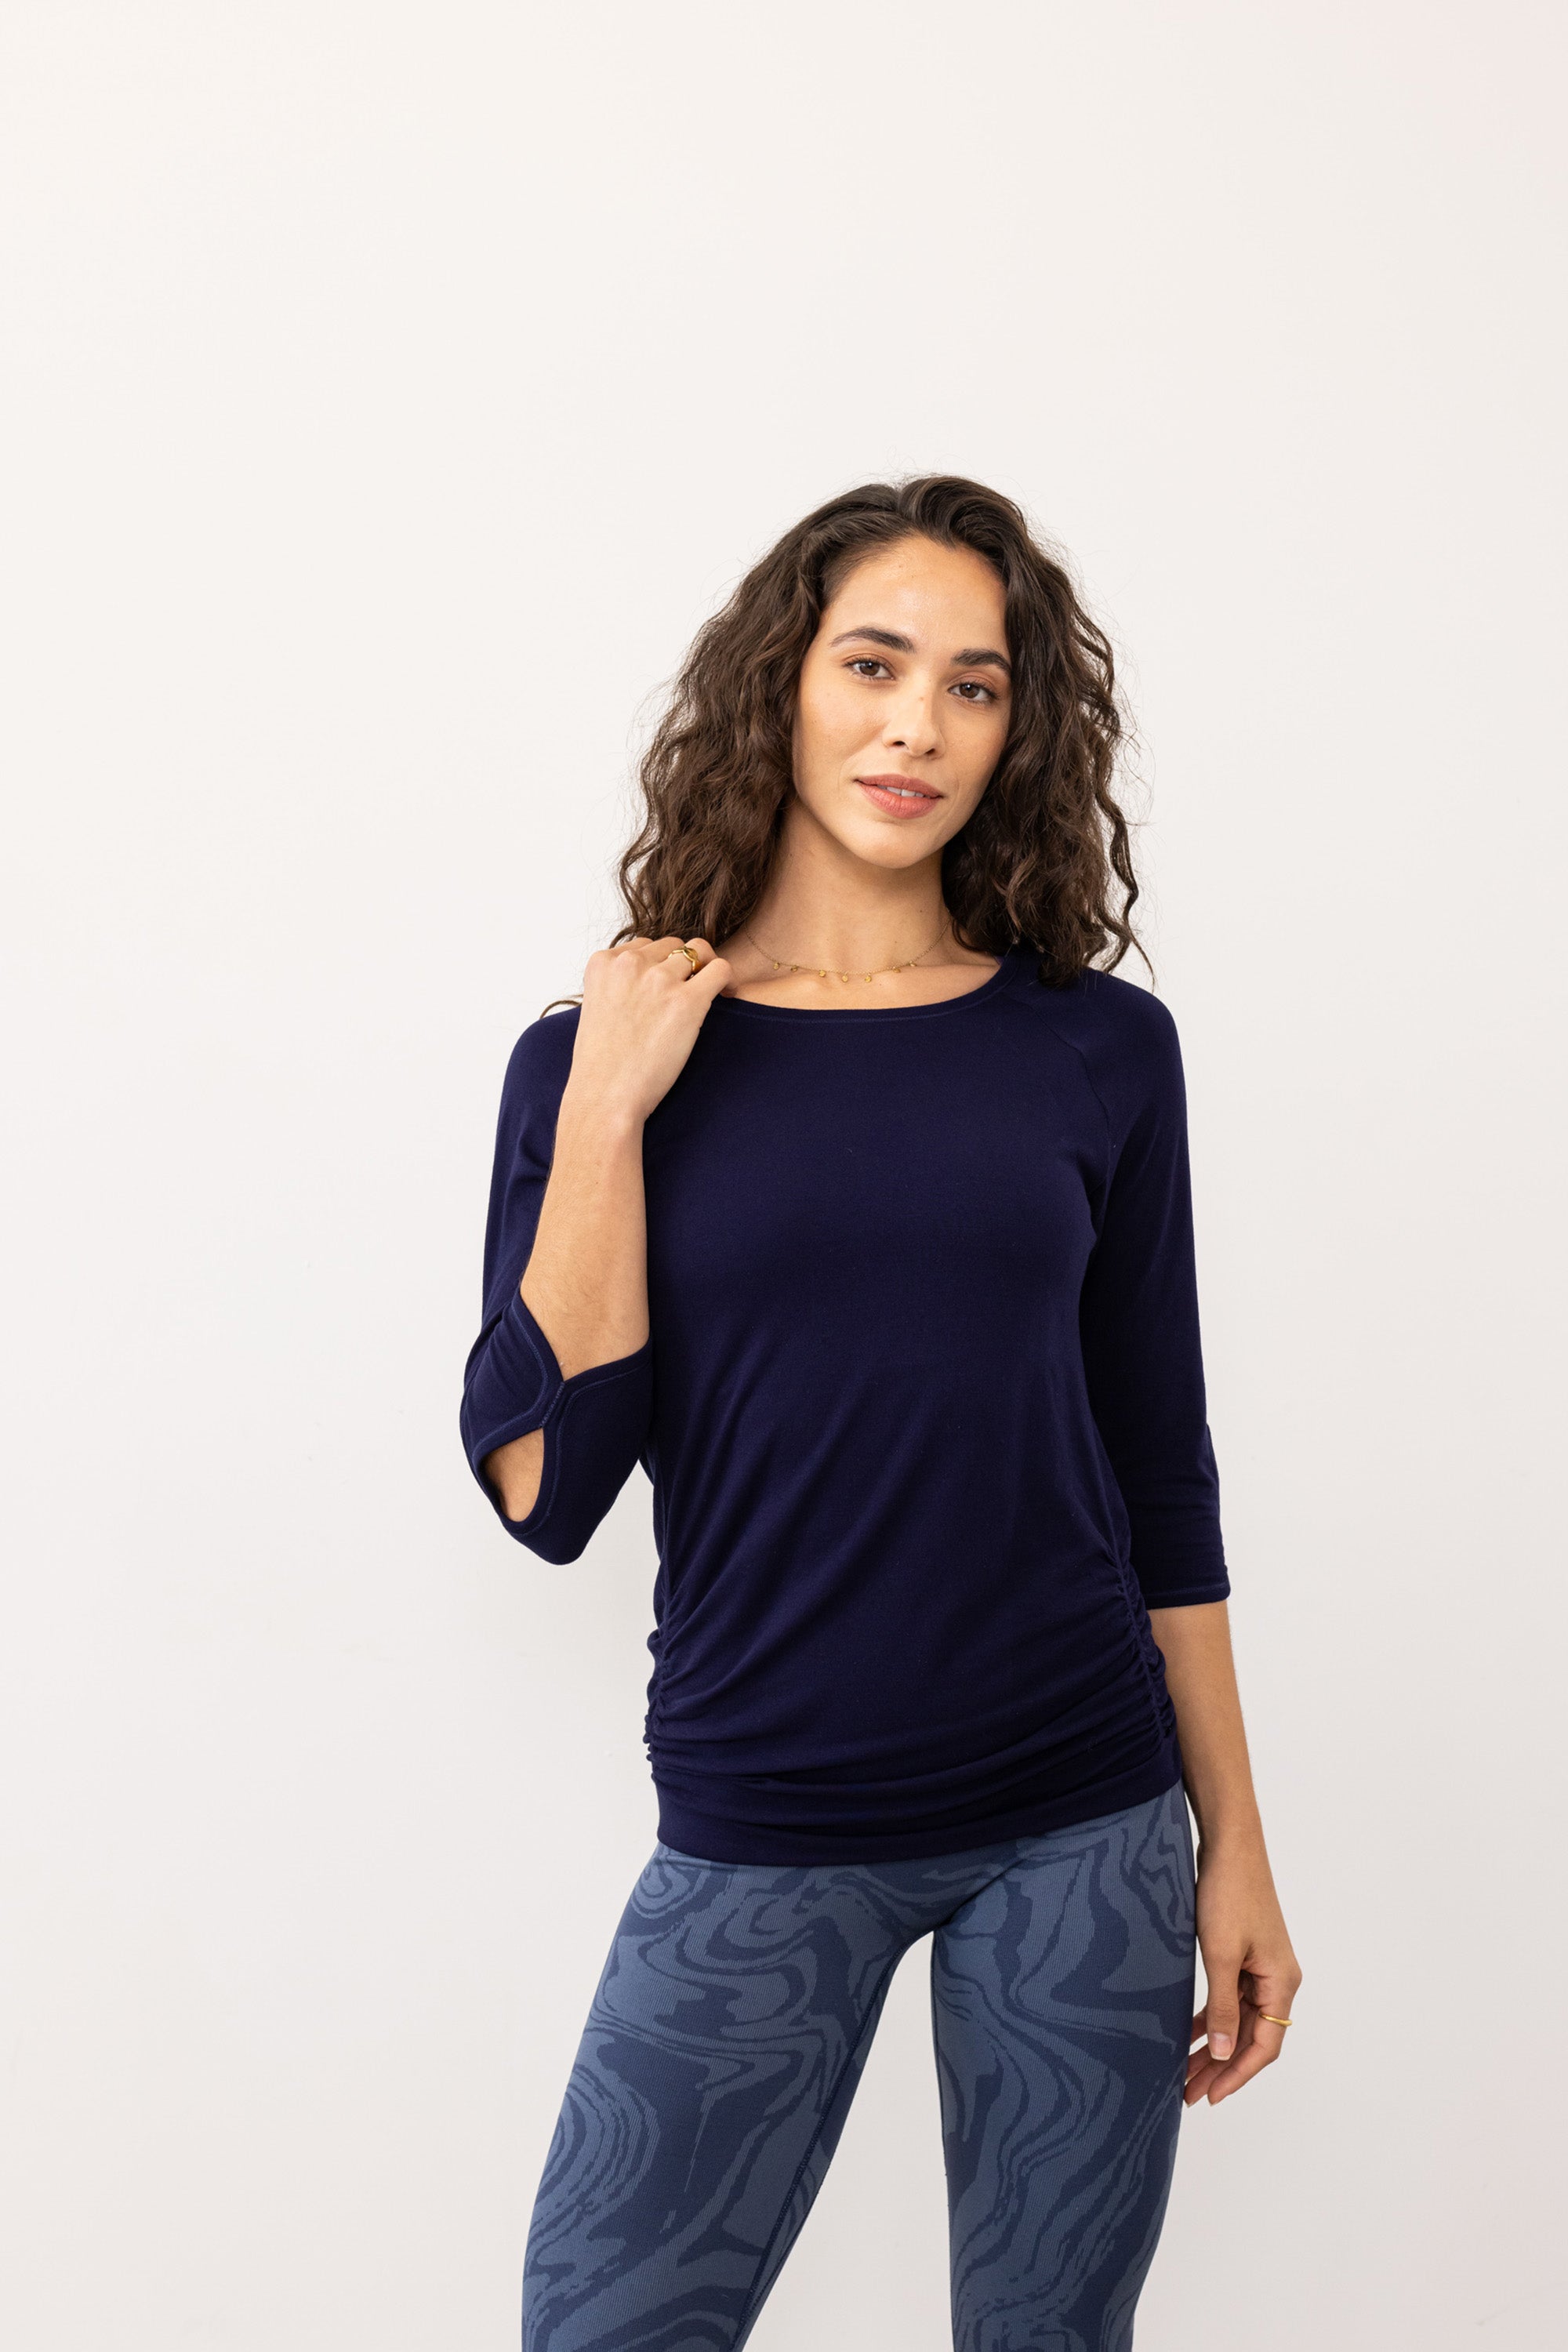 Navy blue soft bamboo 3/4 sleeve performance round neck top with side ruching for yoga, pilates, running and exercise by sustainable activewear brand Jilla Active. 